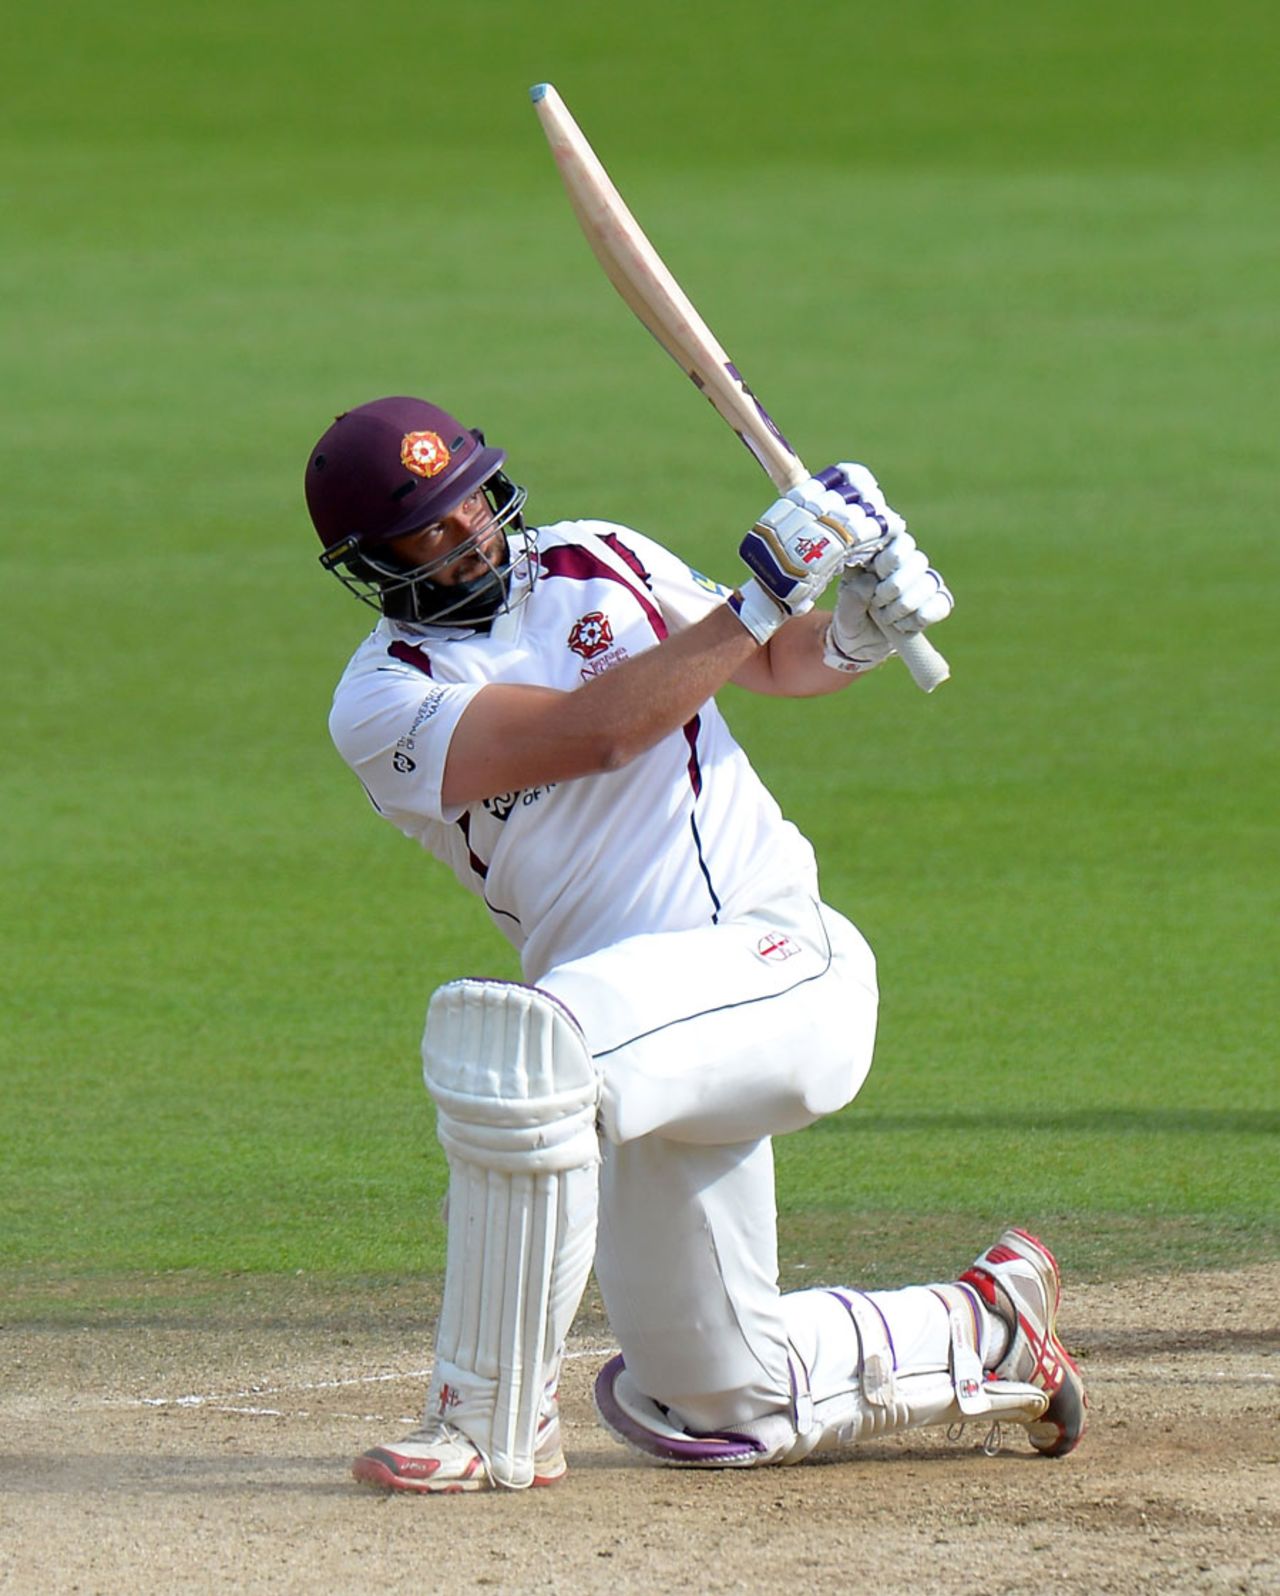 David Murphy struck his maiden first-class hundred, Surrey v Northamptonshire, County Championship, Division Two, 4th day, September 25, 2015